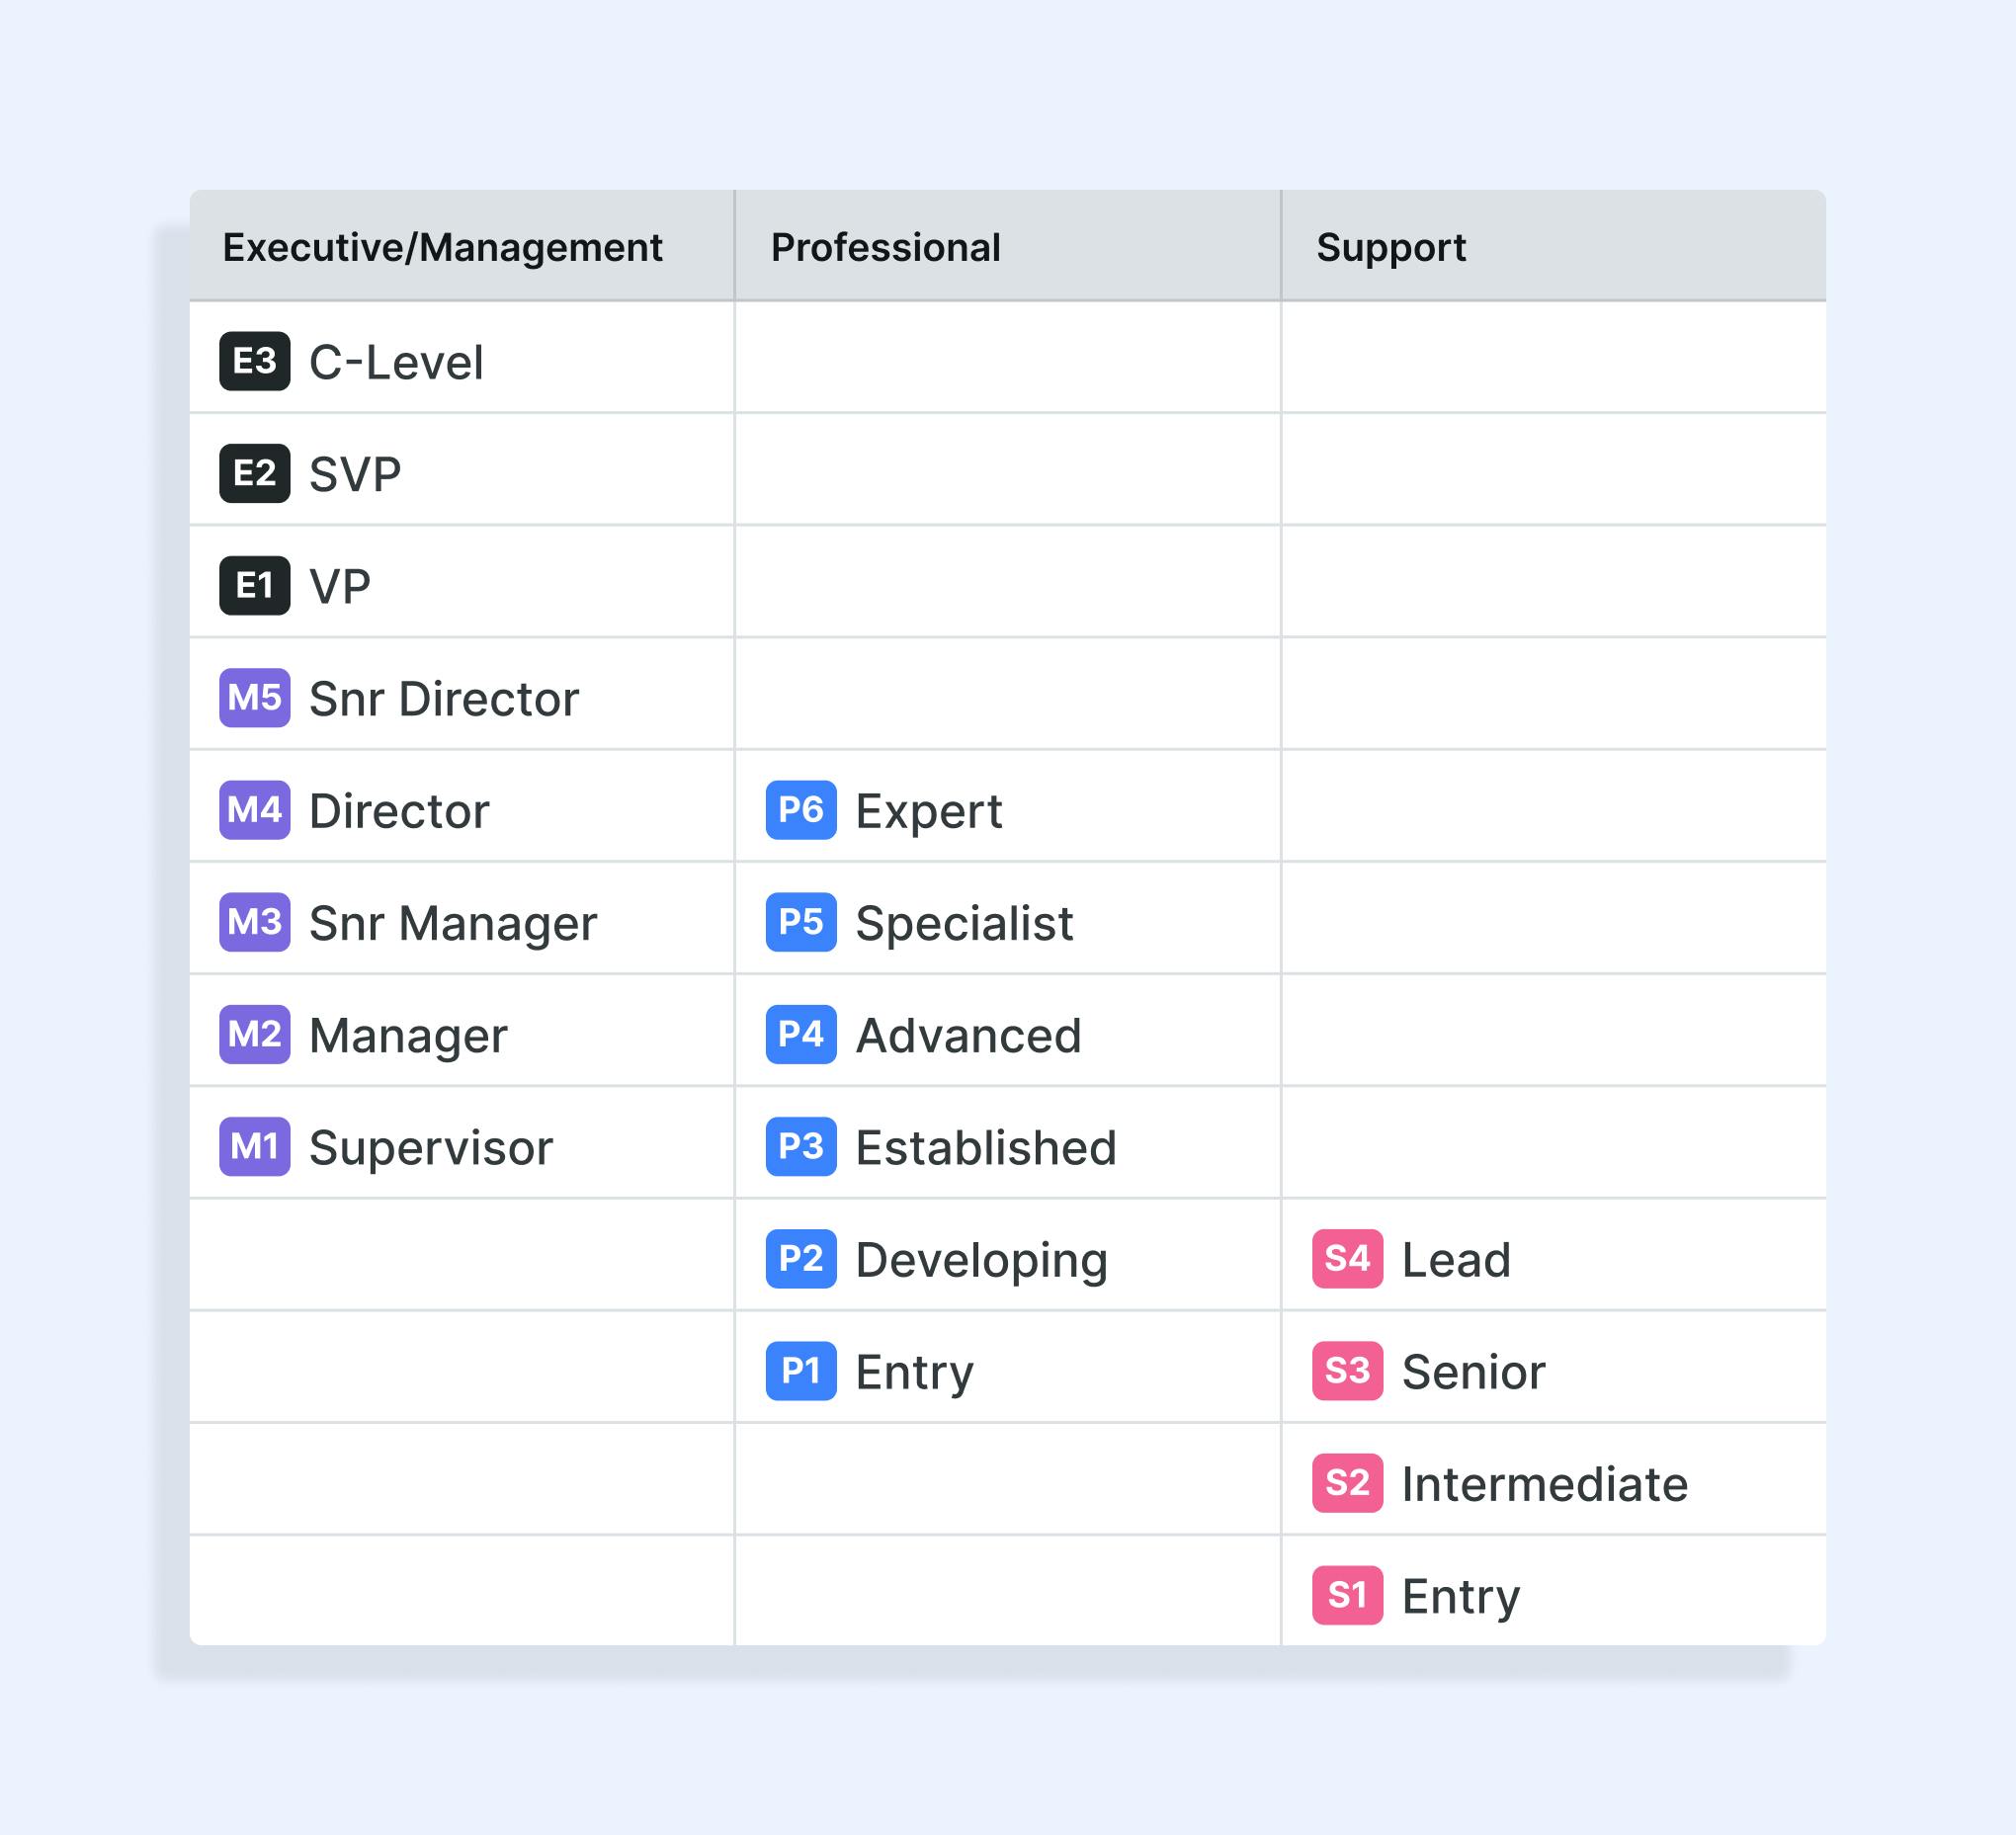 Ravio's level framework, showing job levels across support, professional, management, and executive career tracks.